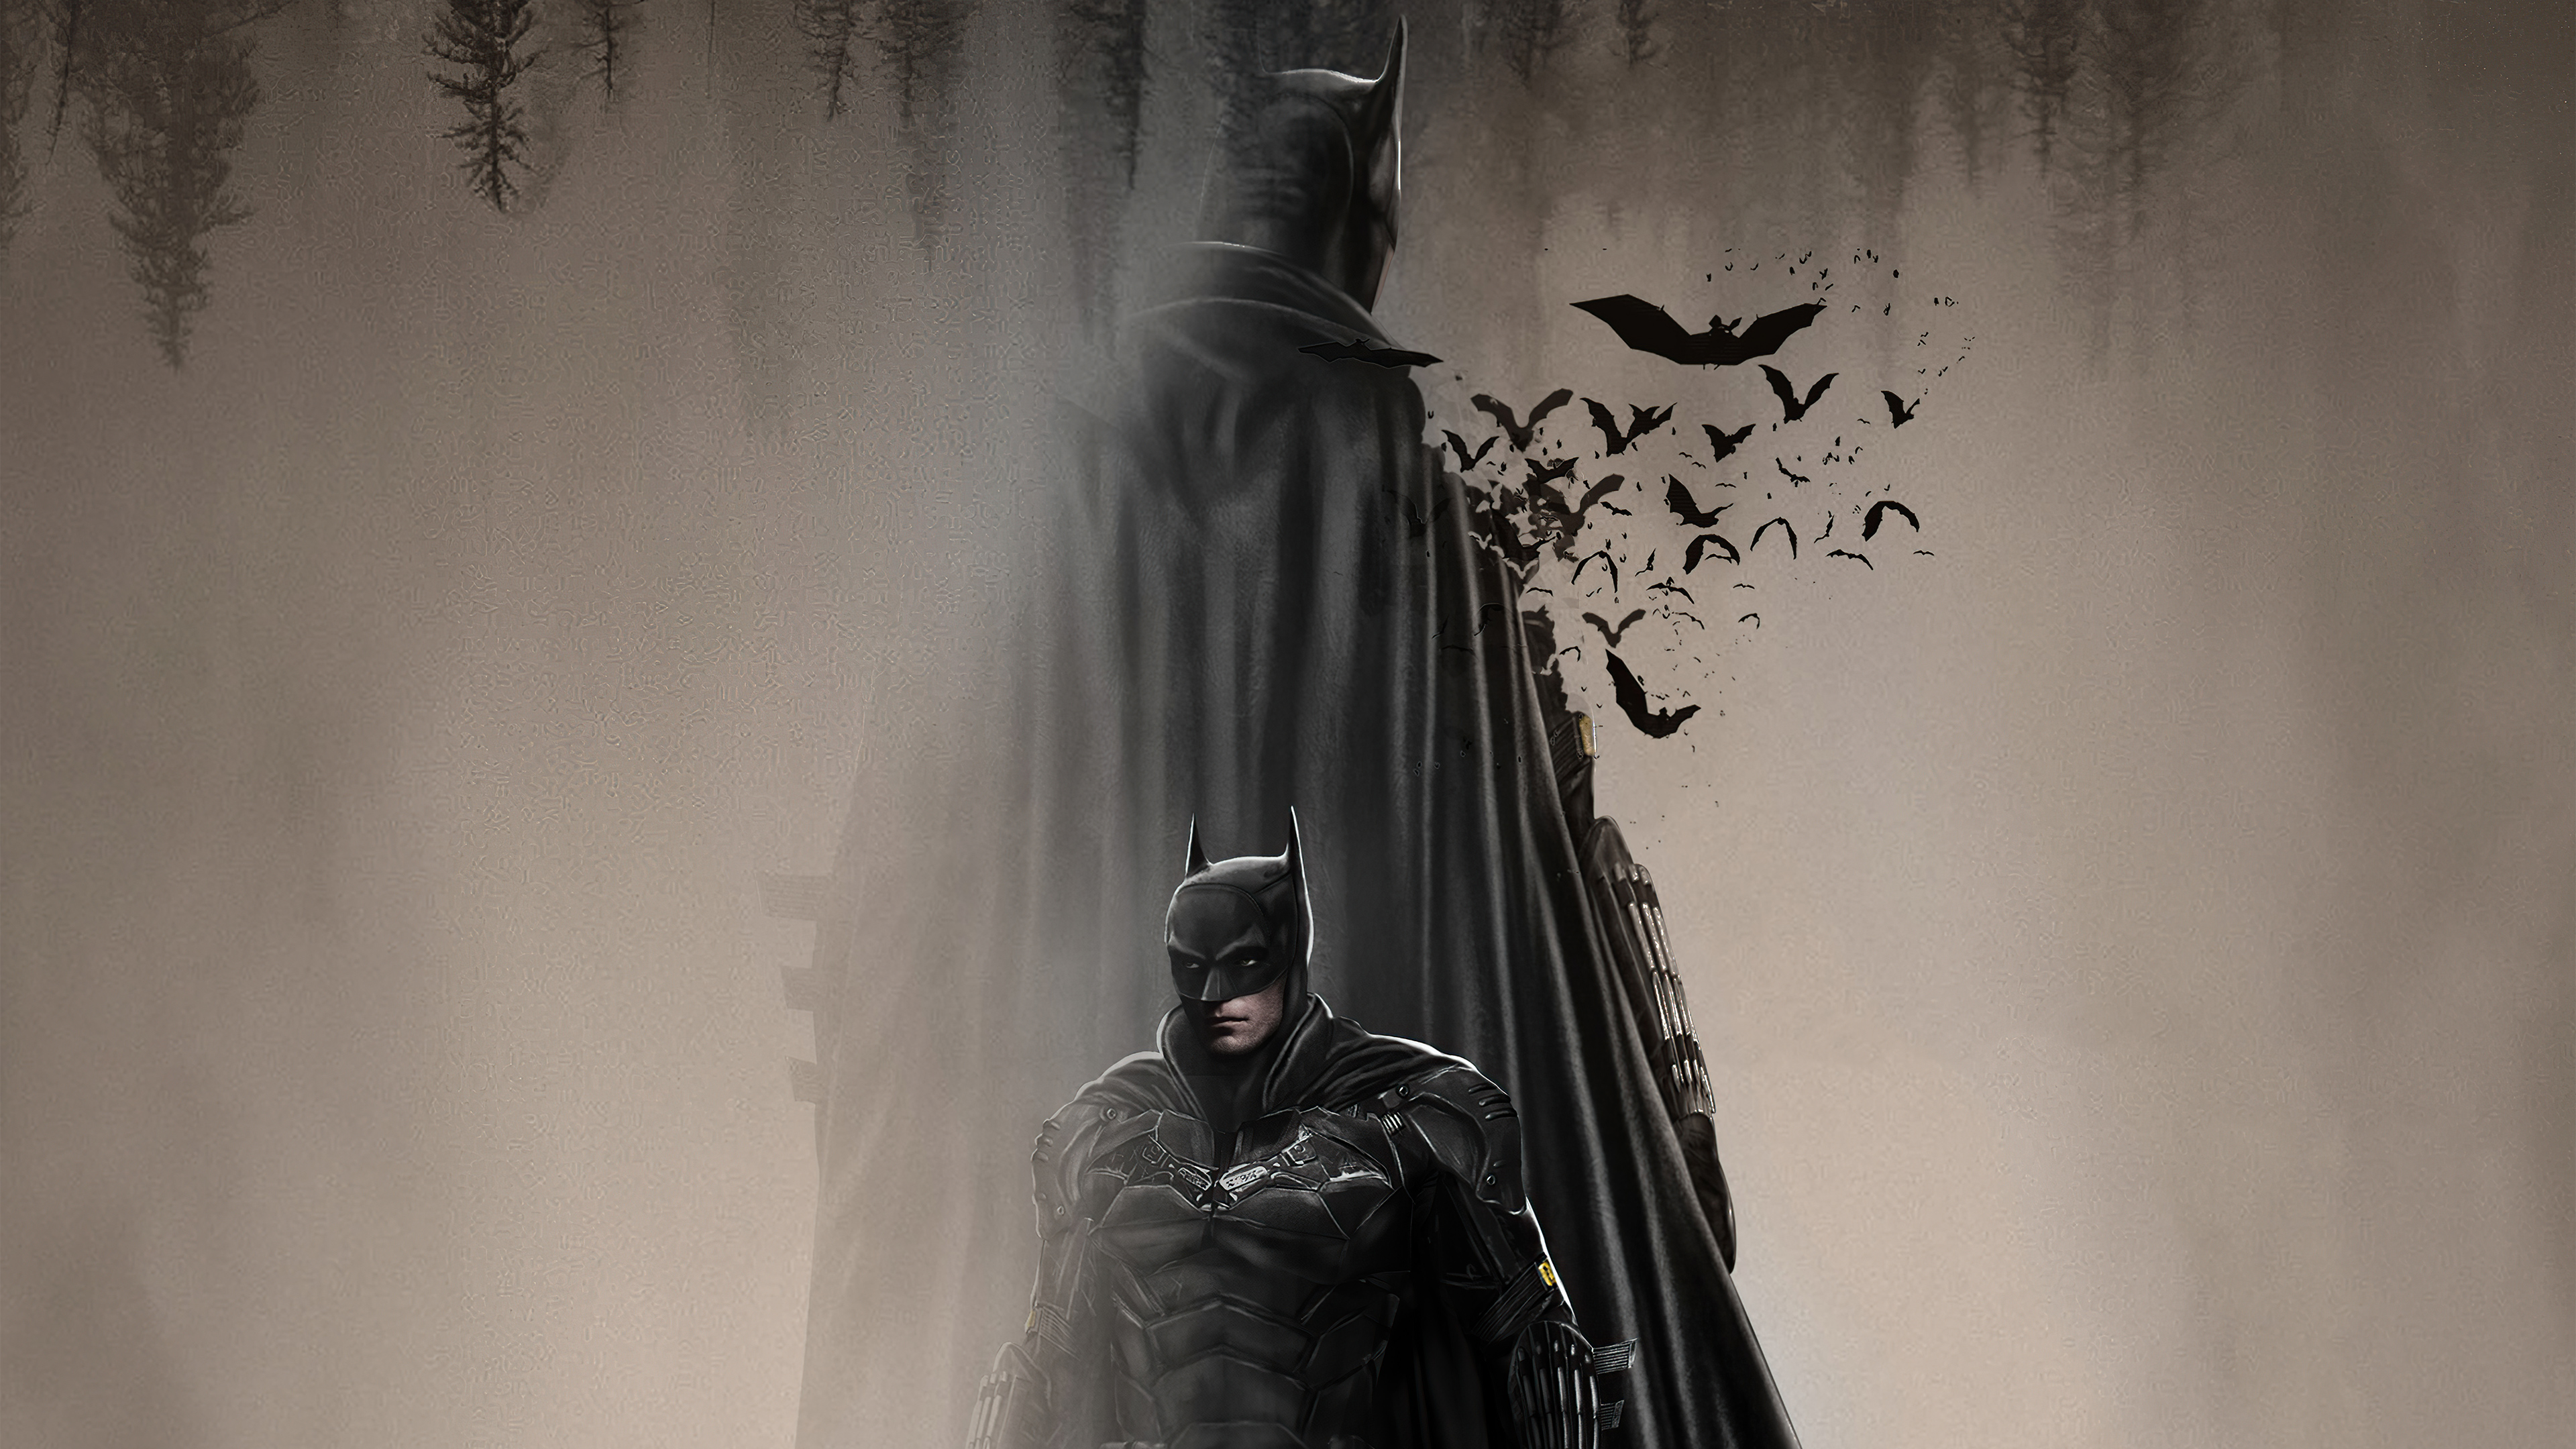 The batman in dust k hd movies k wallpapers images backgrounds photos and pictures